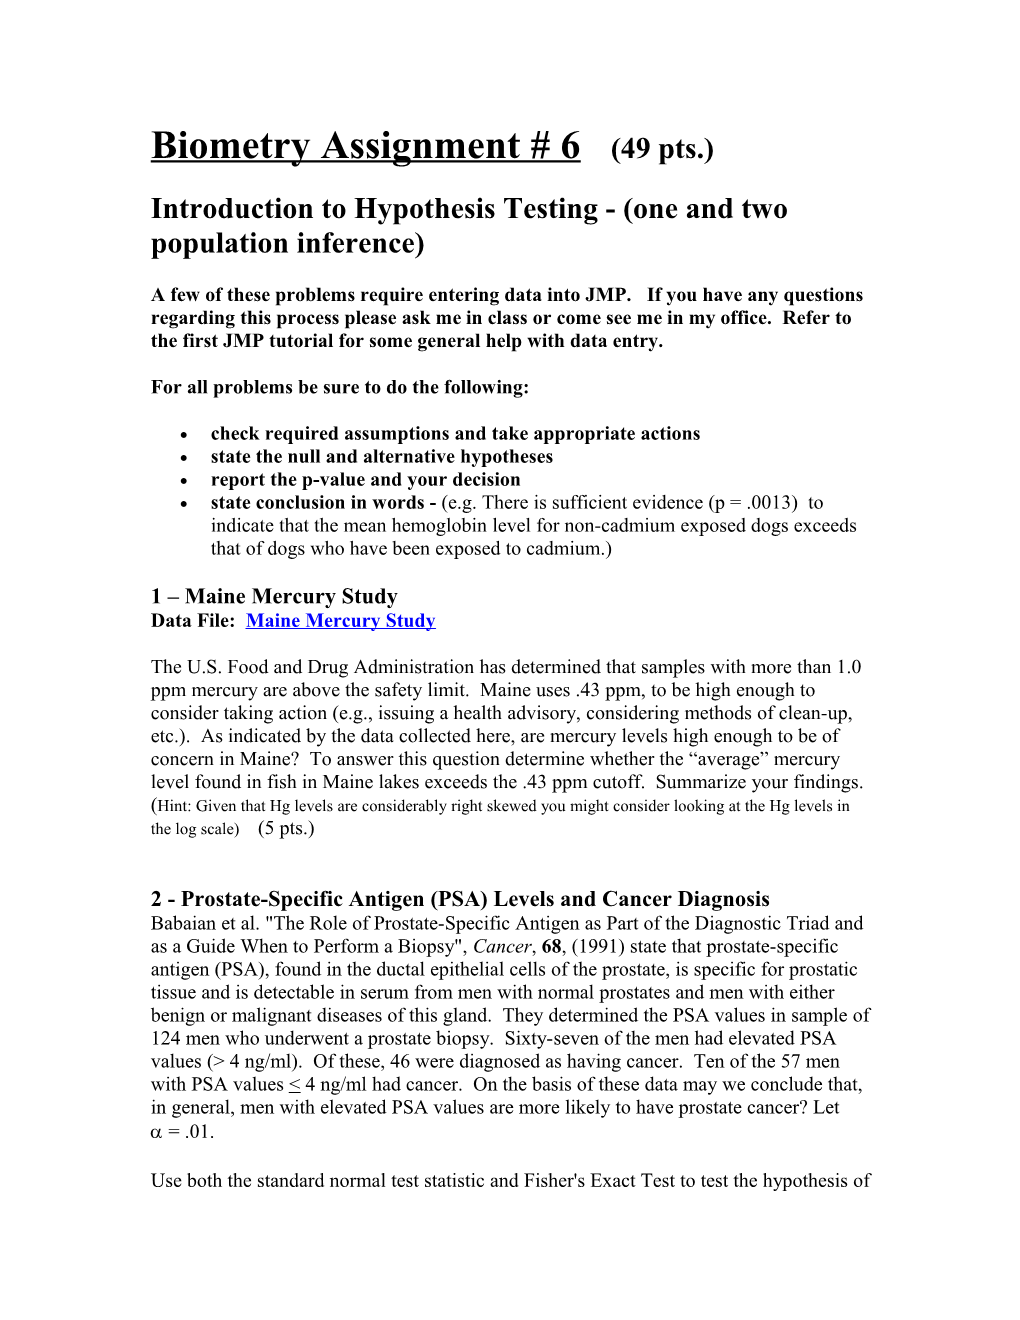 Introduction to Hypothesis Testing - (One and Two Population Inference)